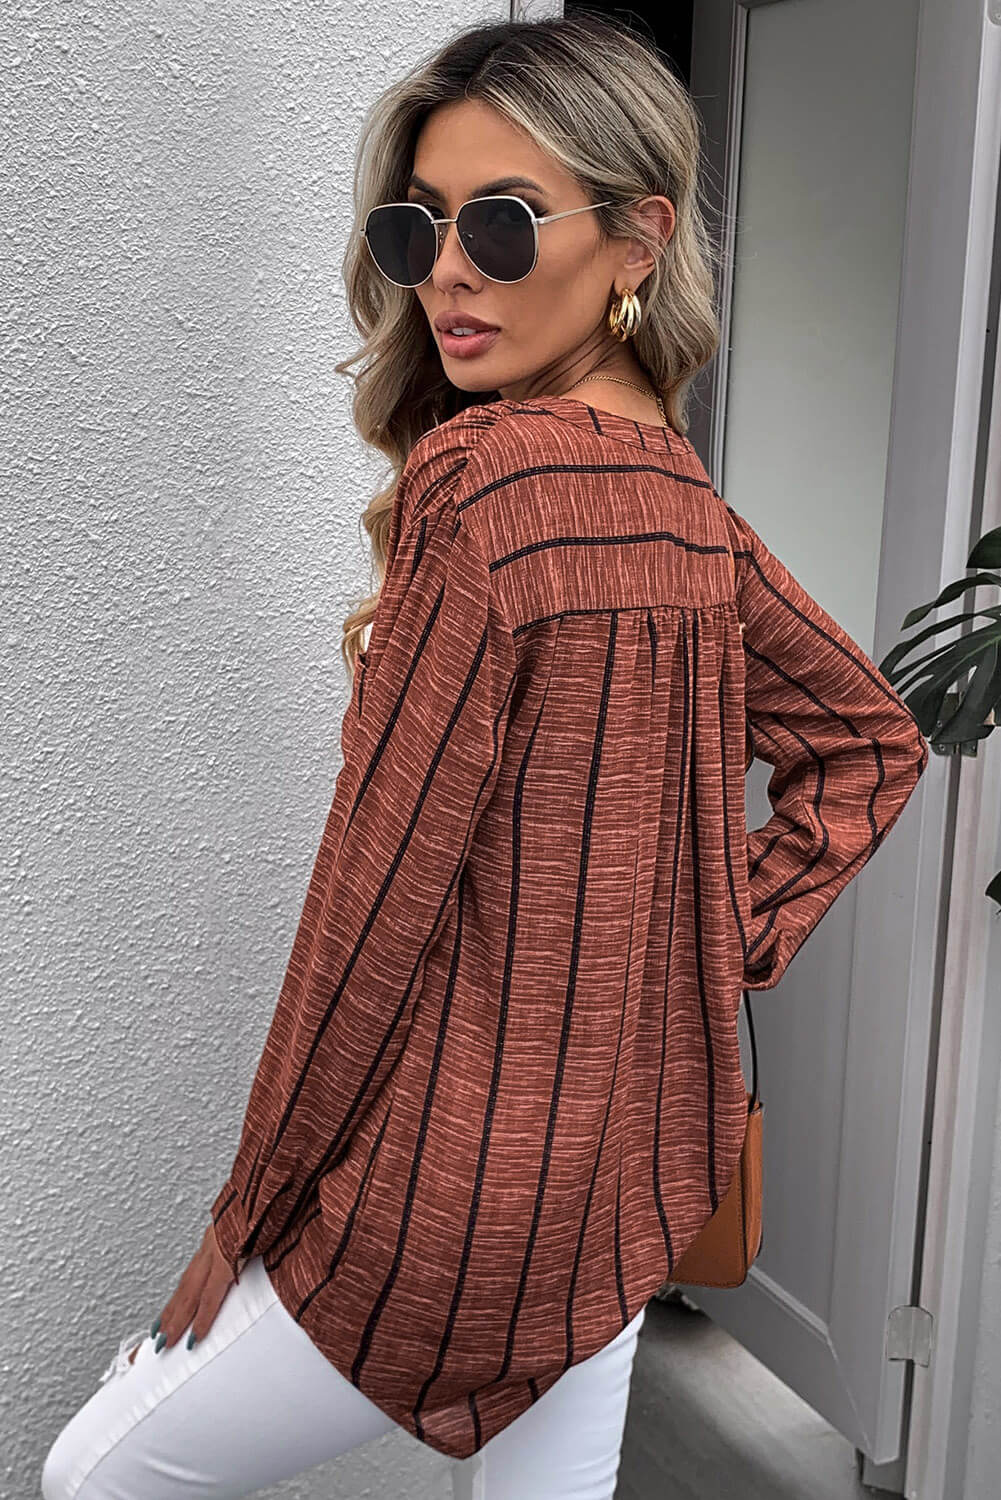 Striped V-Neck High-Low Shirt with Breast Pocket - The Lakeside Boutique